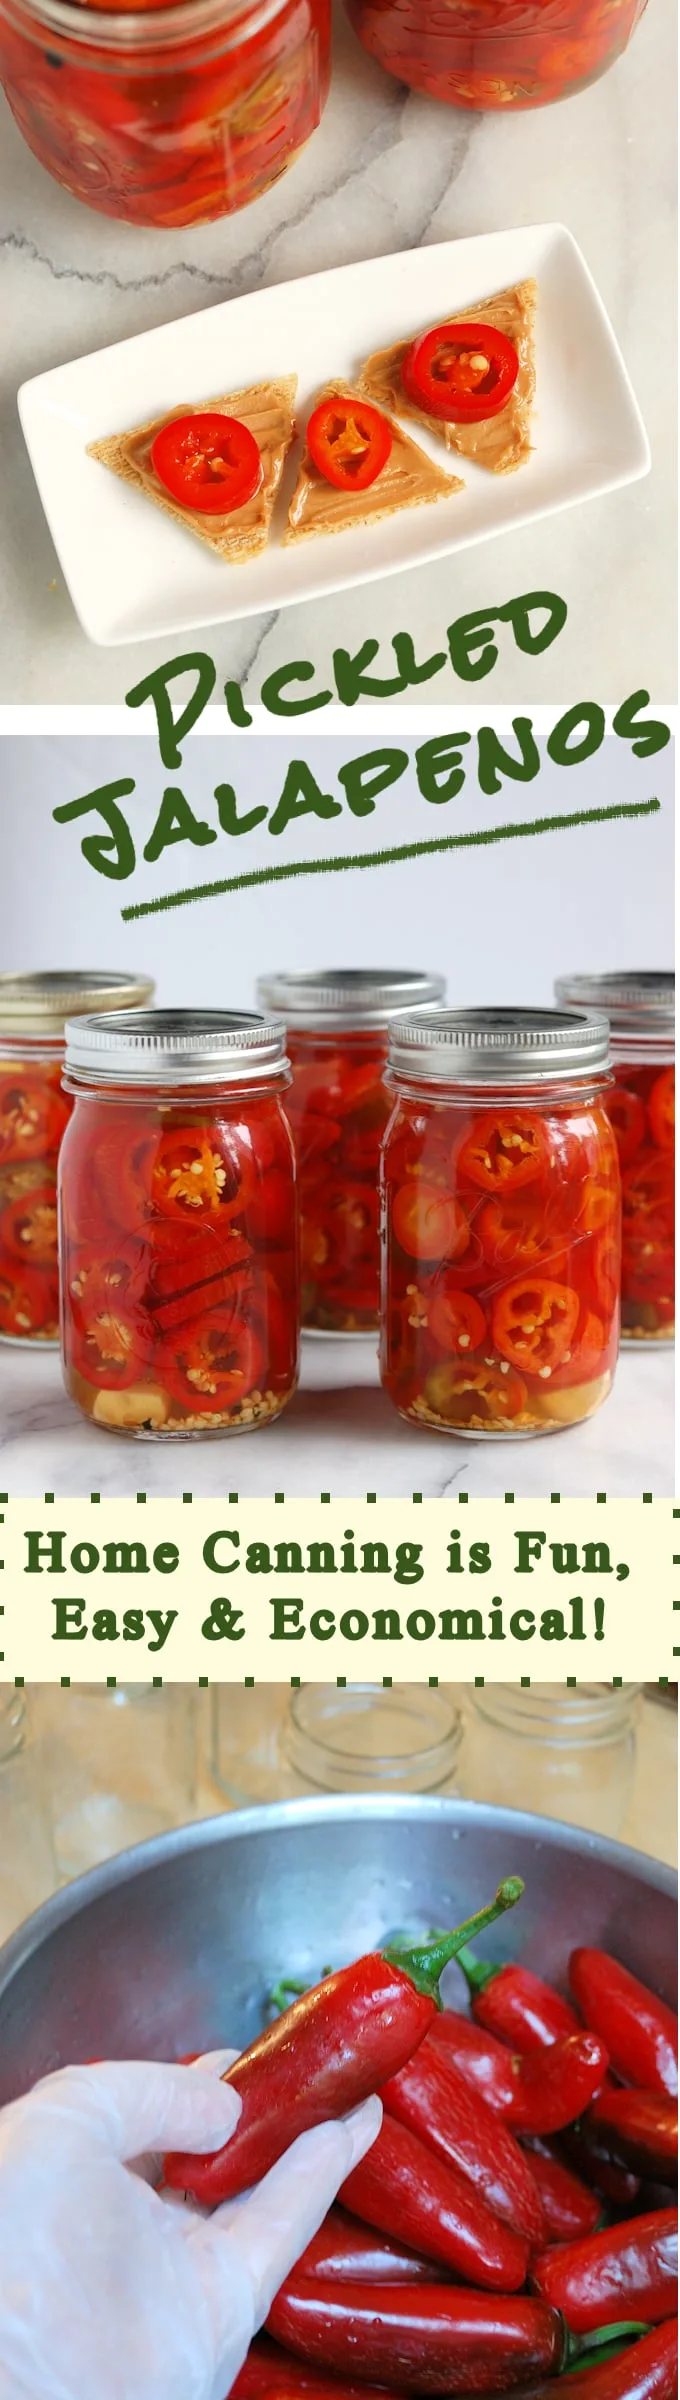 Save the taste of summer with home-canned Pickled Jalapeno peppers.